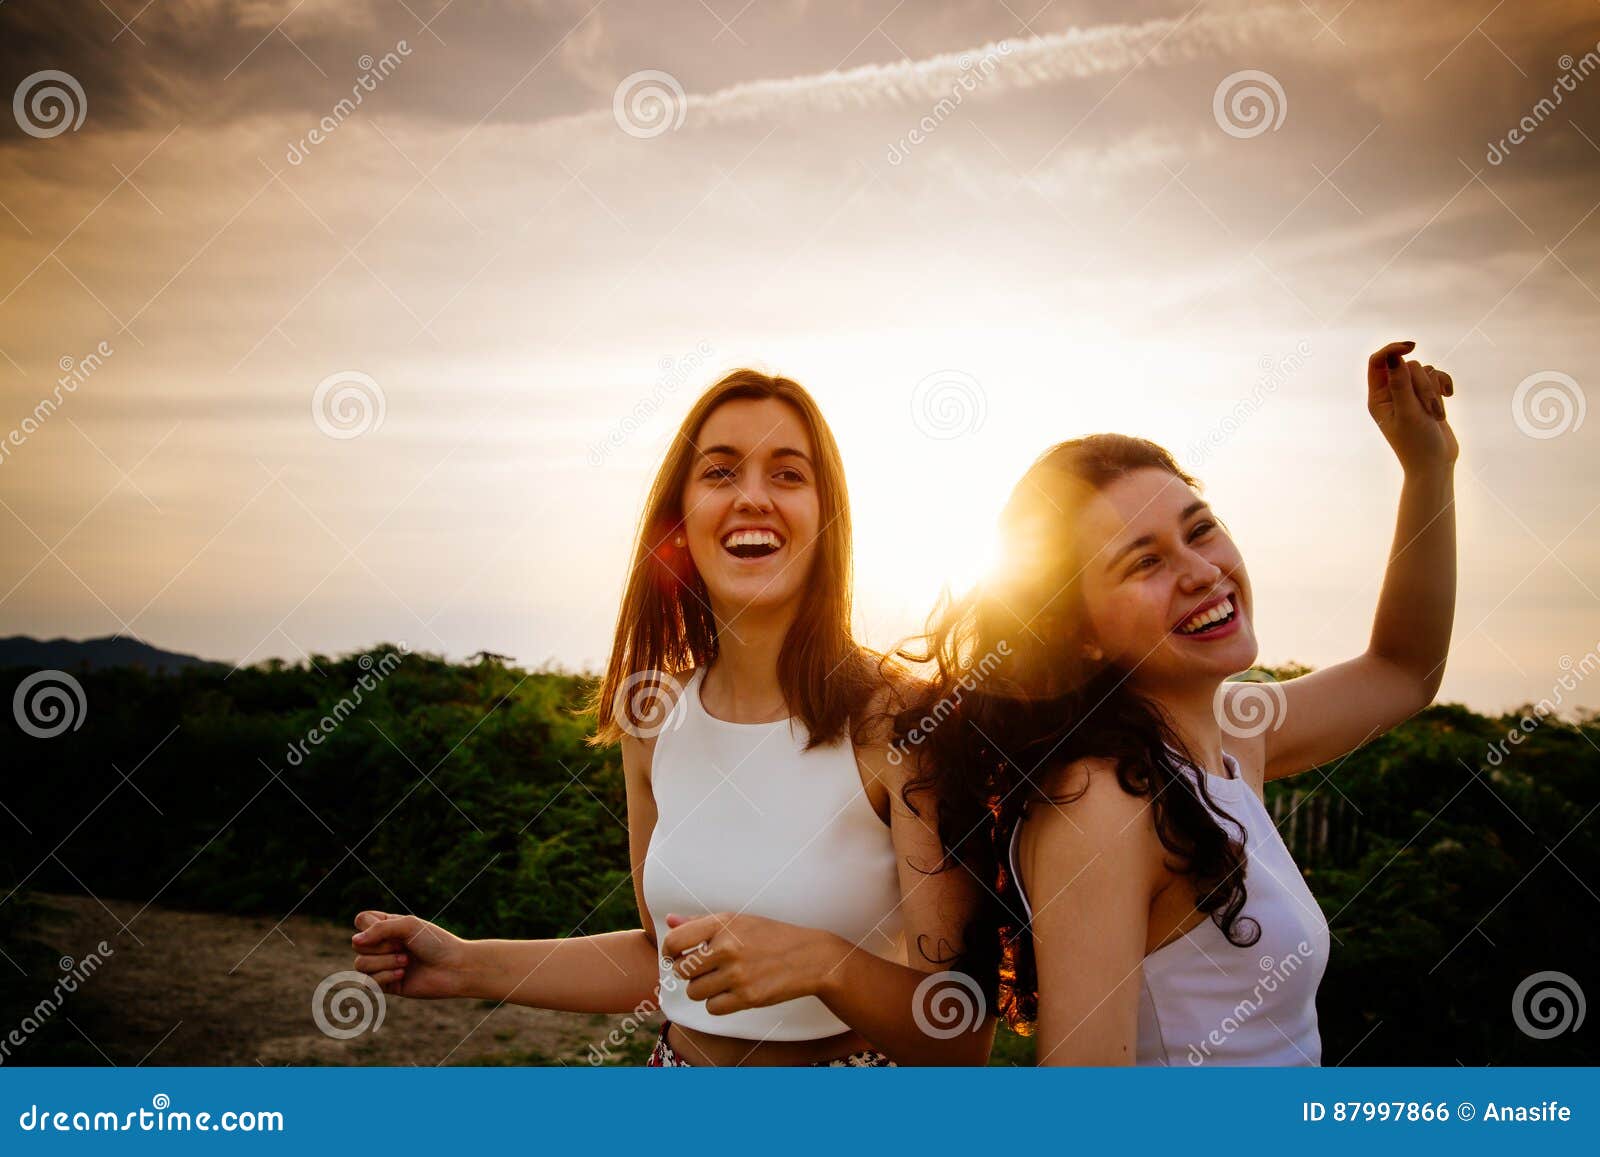 Women Dancing At Sunset Outdoors Stock Photo - Image of party, dusk ...